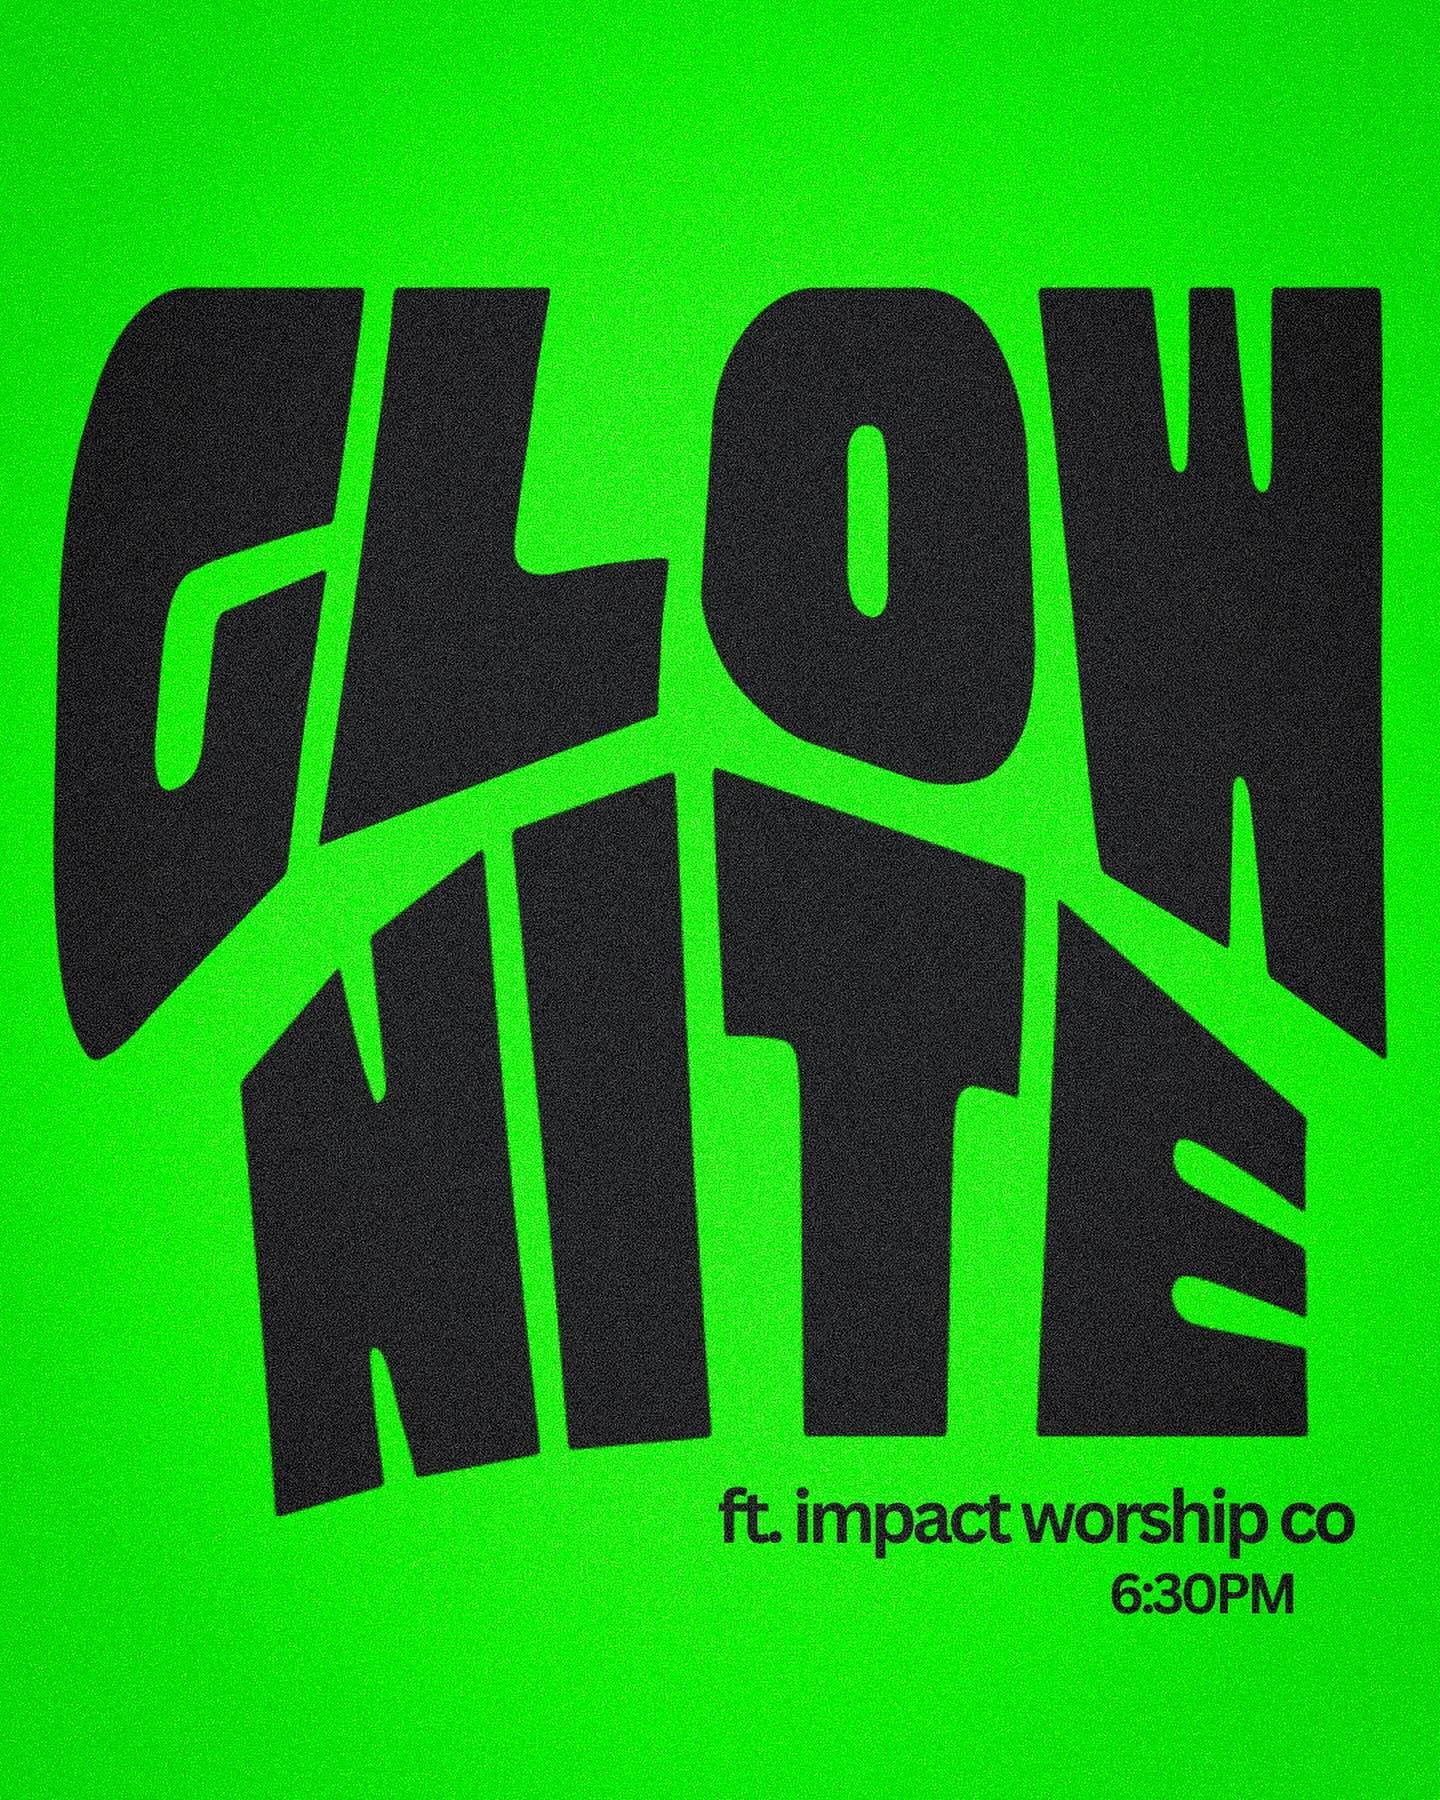 ⭐️ TONIGHT'S THE NIGHT ⭐️

GLOW with us and @impactworship.co !! bring a friend &amp; we'll see you at 6:30 💫🔭